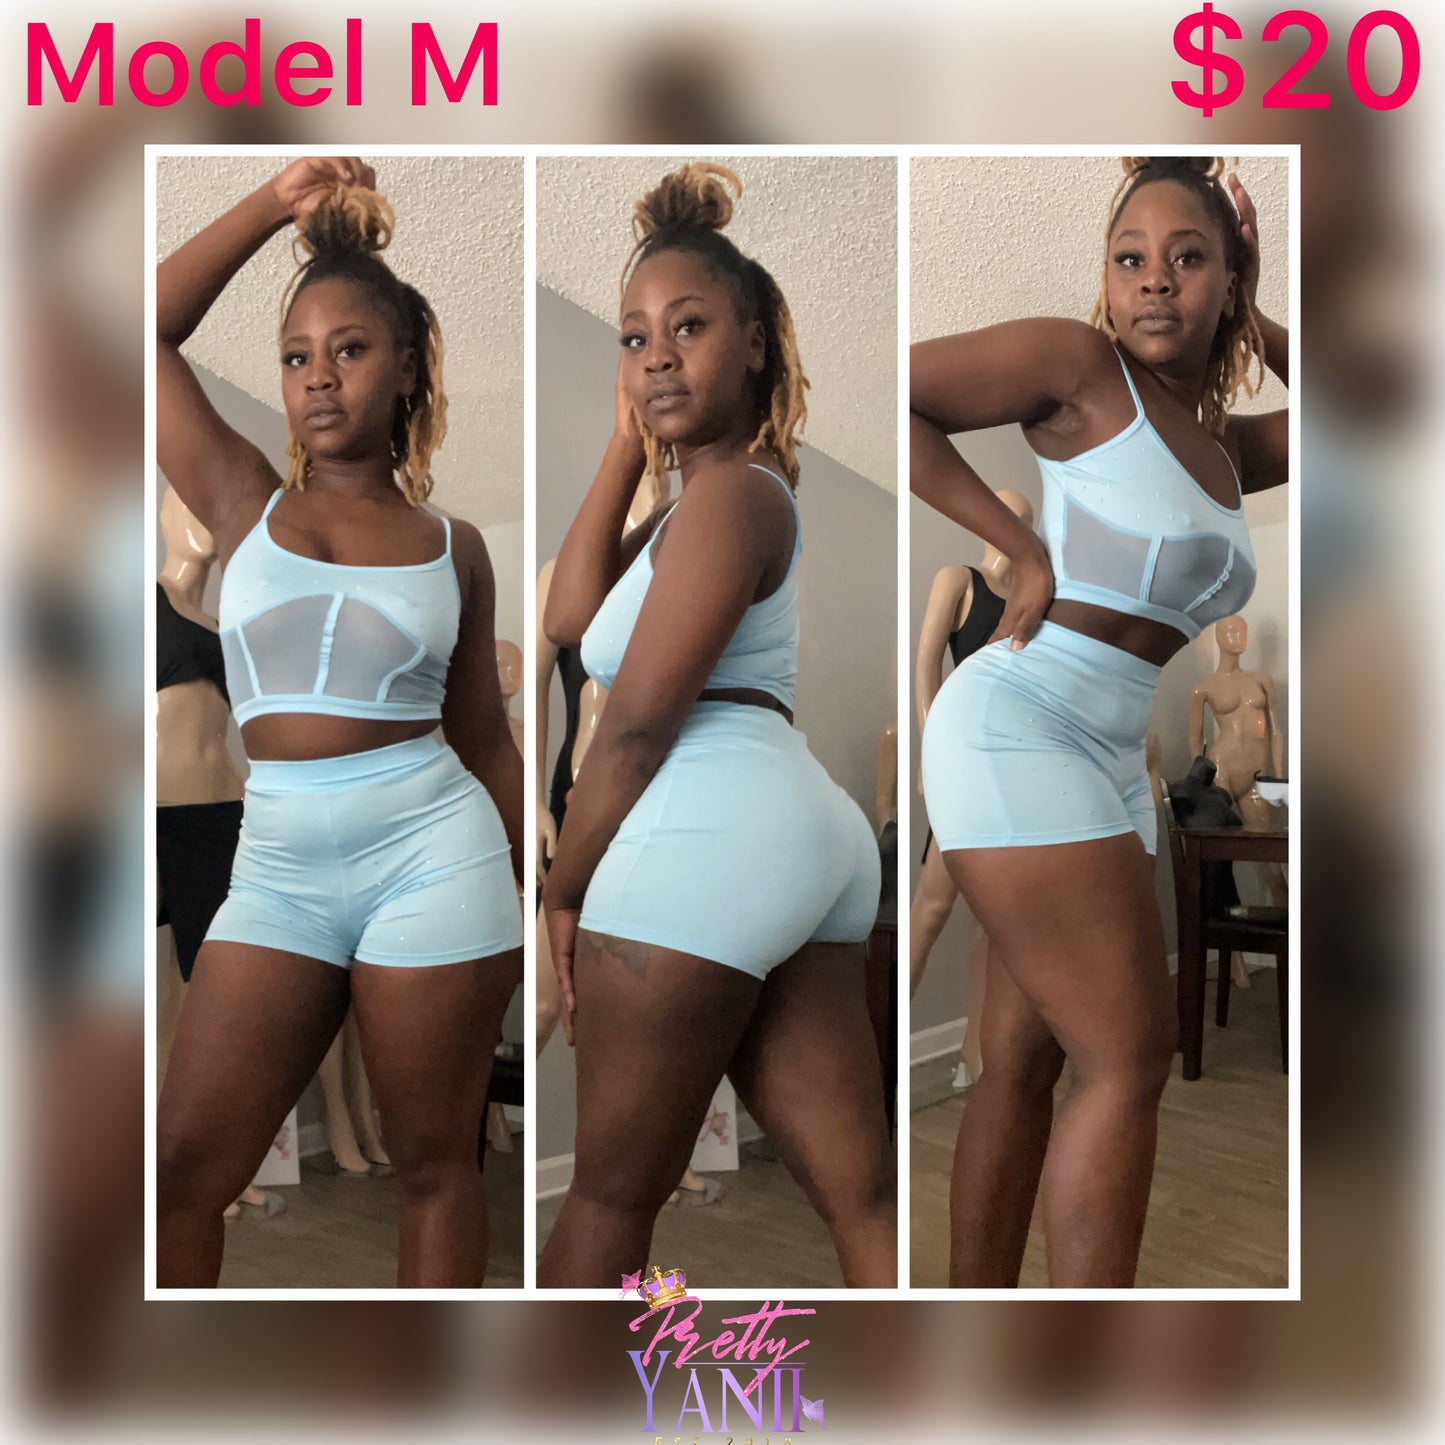 matching set includes a sky blue spaghetti strap crop top and high waist shorts, available in both regular and plus sizes